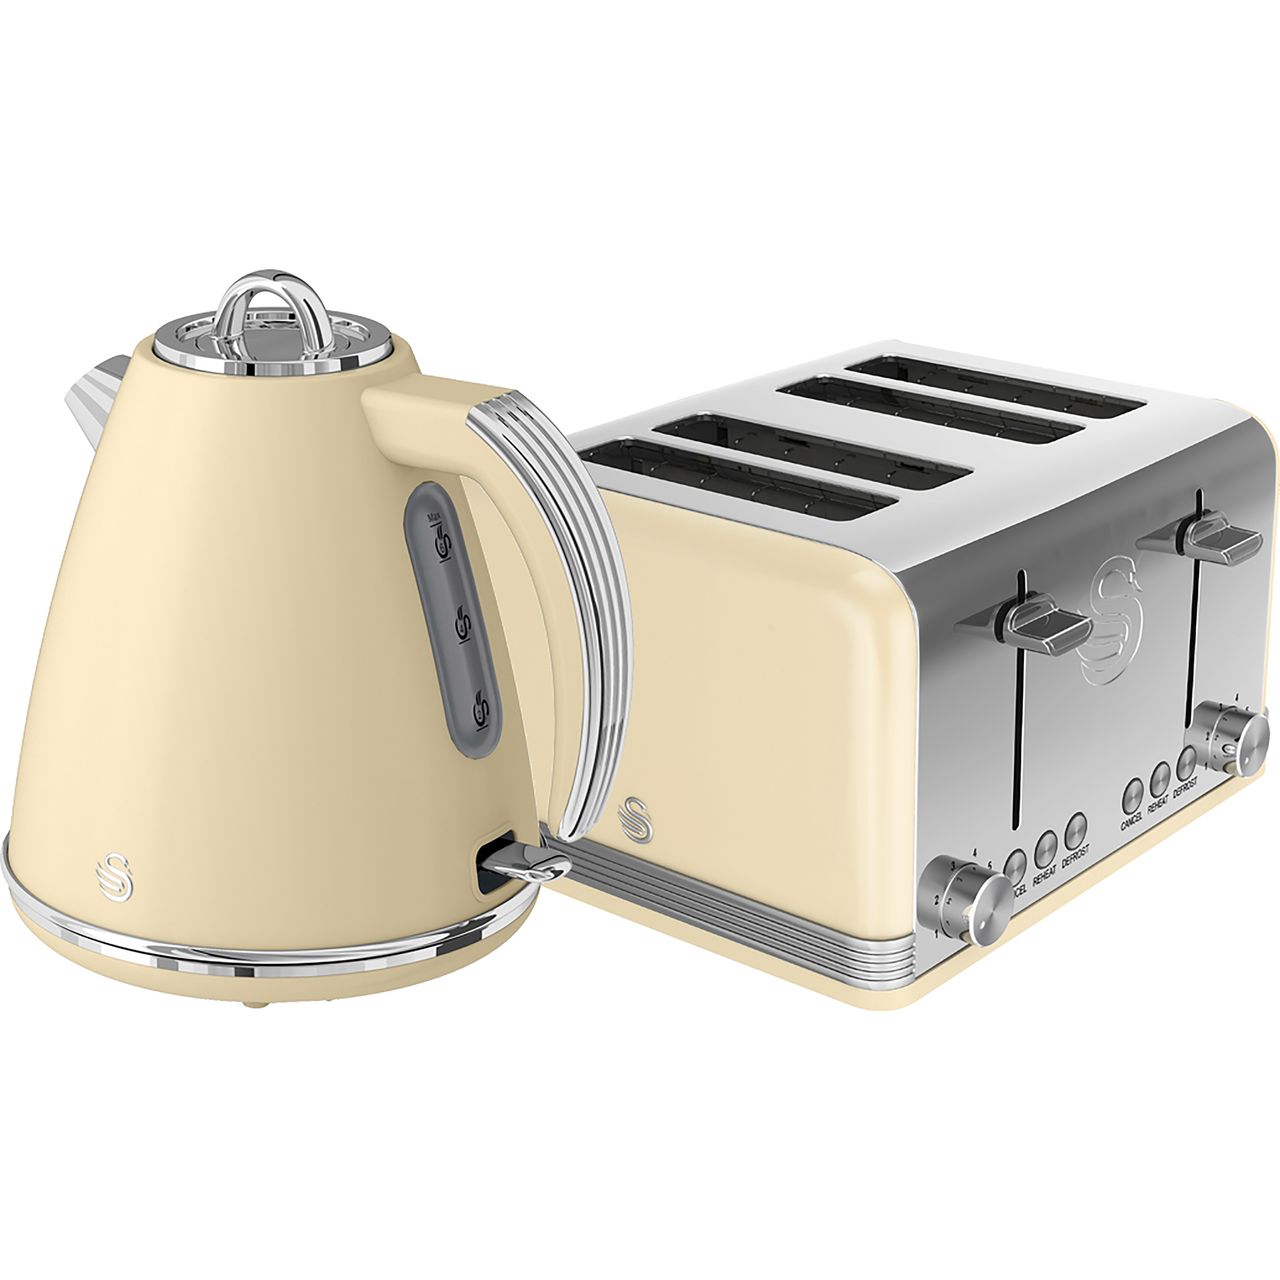 Swan Retro STP7041CN Kettle And Toaster Sets Review